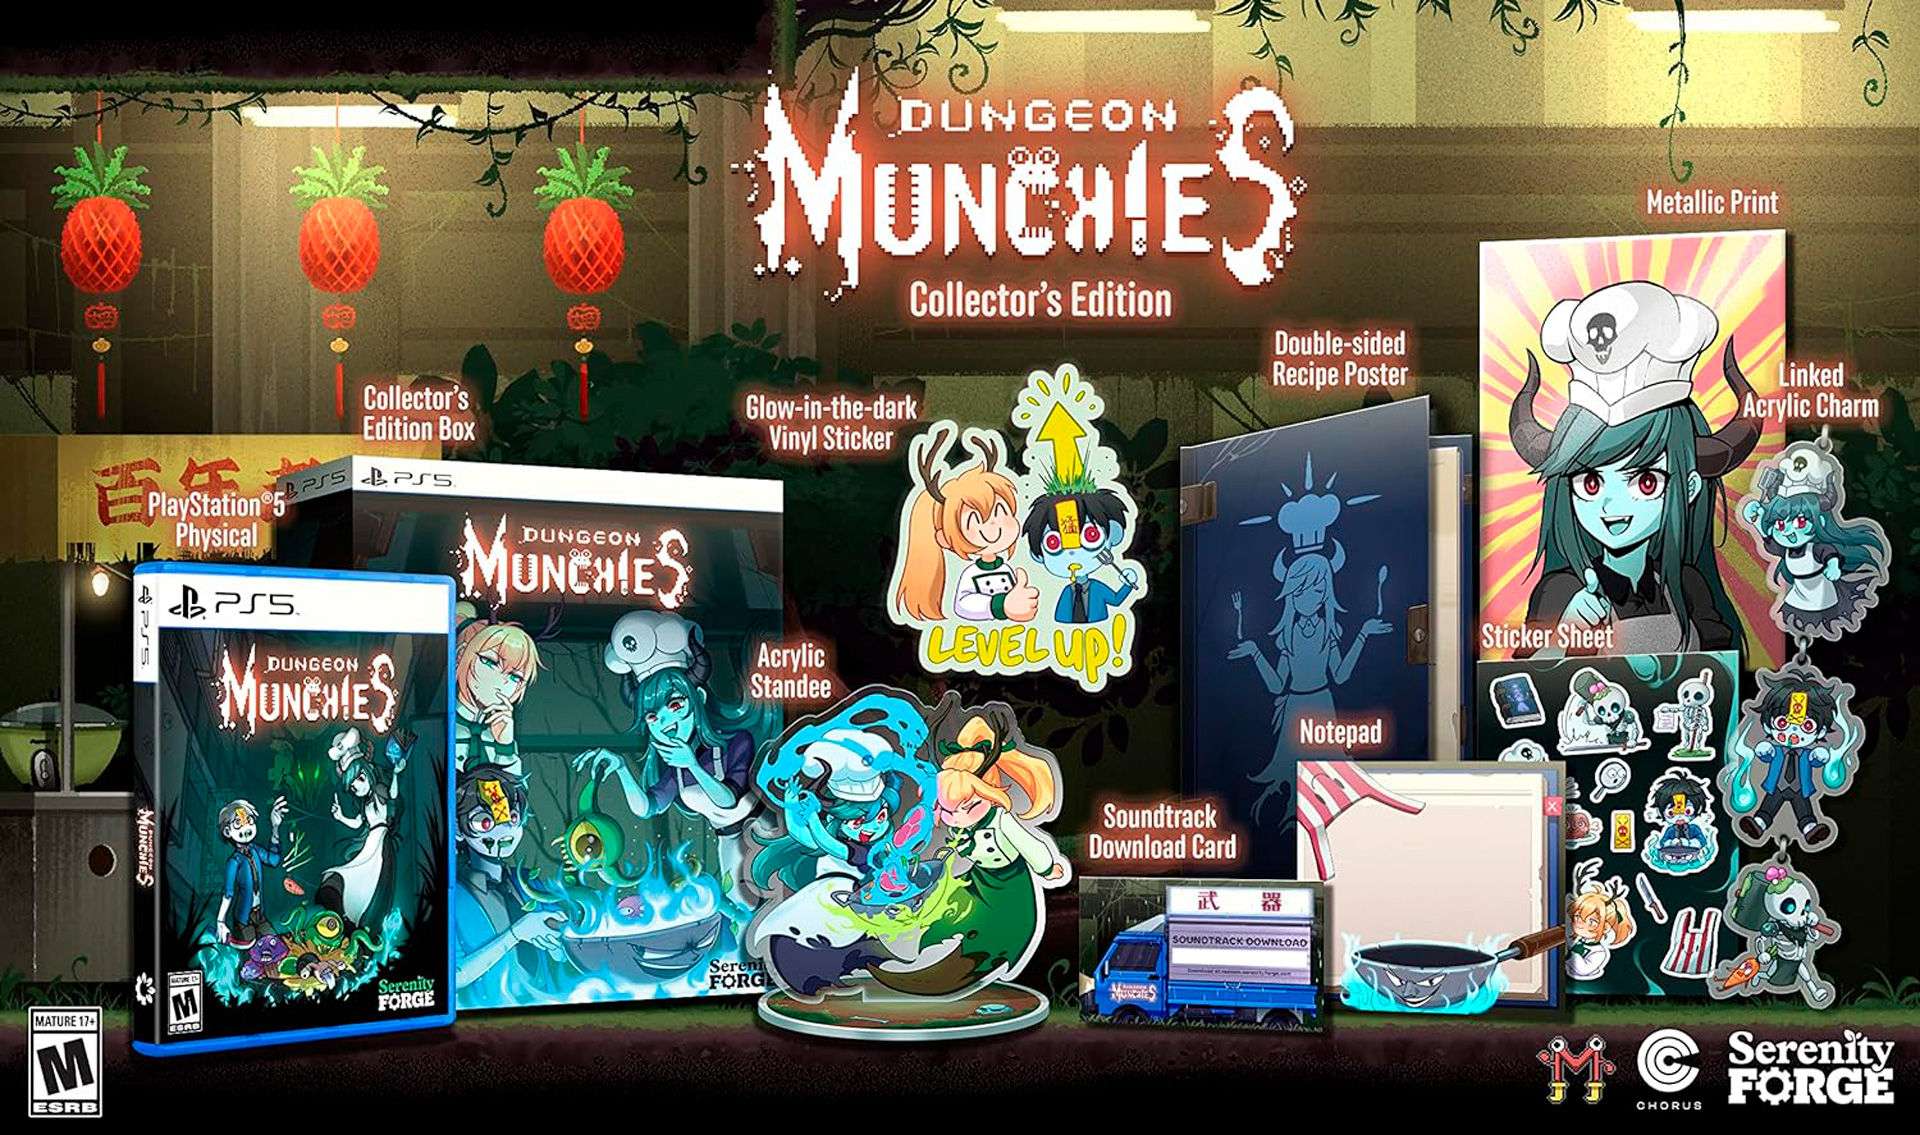 Jogo Dungeon Munchies Collector's Edition para PS5